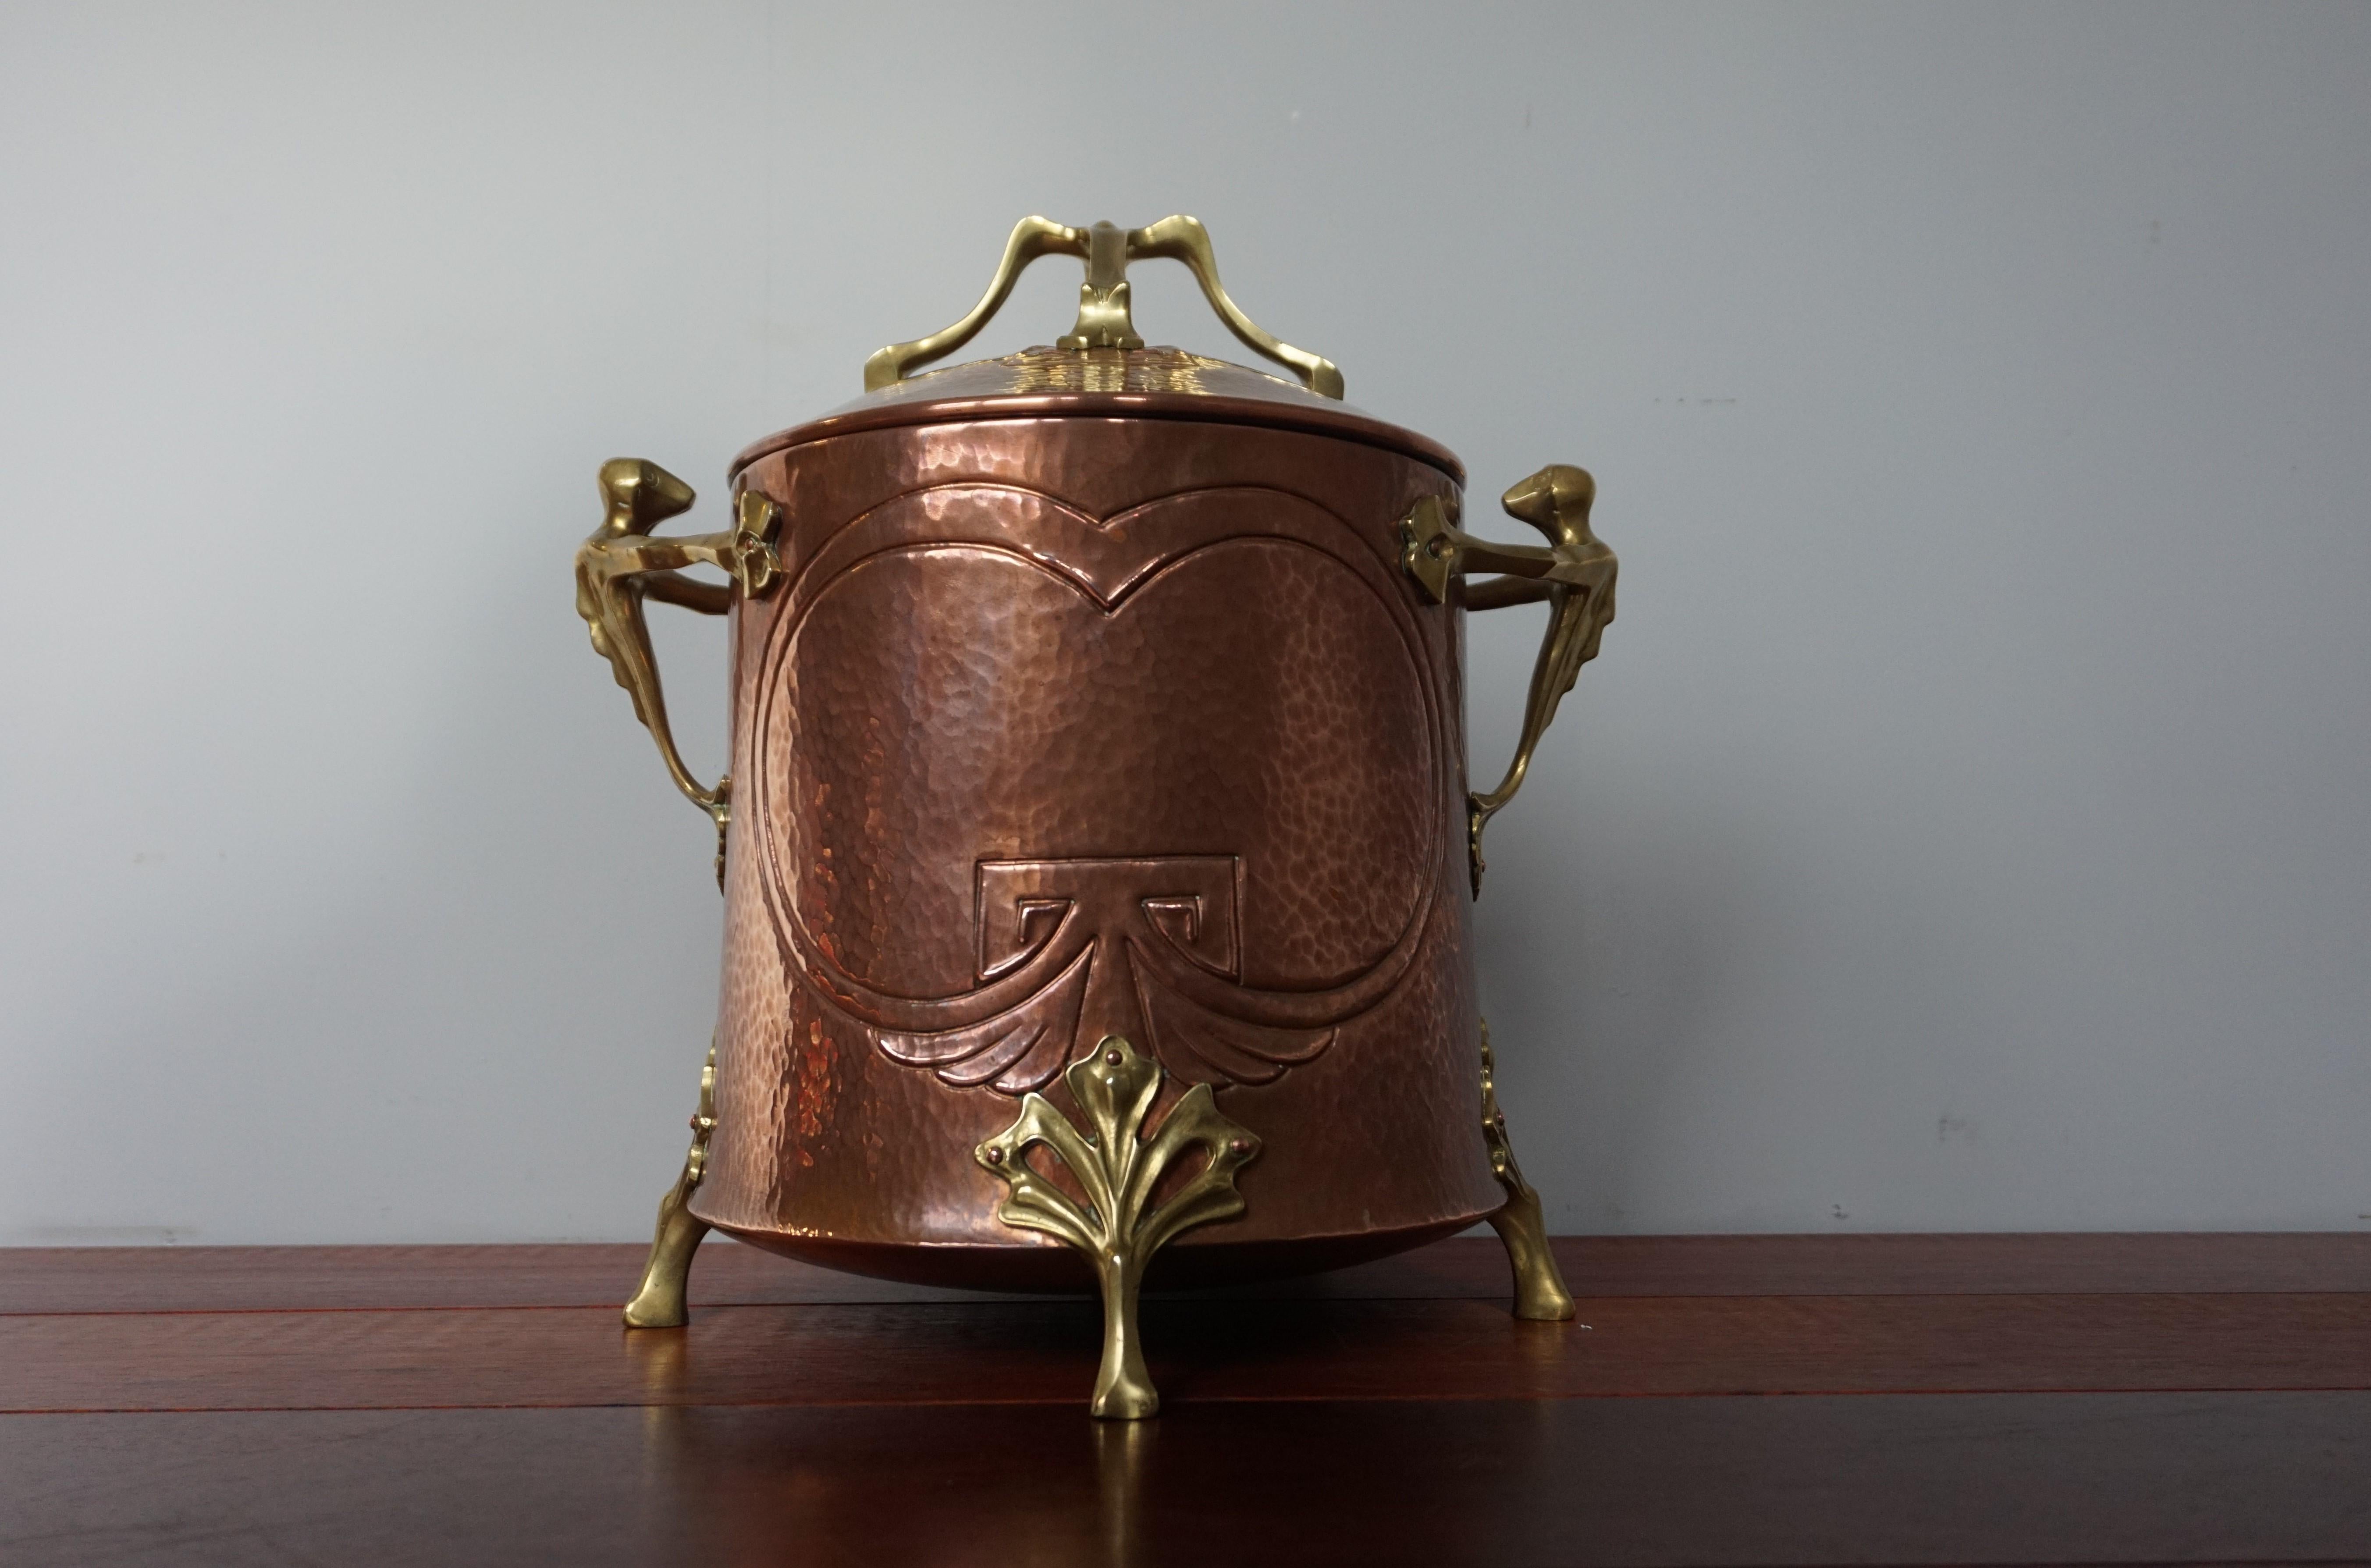 Unique and top quality workmanship, Arts & Crafts bucket.

If this unique Arts & Crafts bucket did not have the bronze sculptures and handle on top then we would have been quite certain that this bucket was created by WMF. These famous German